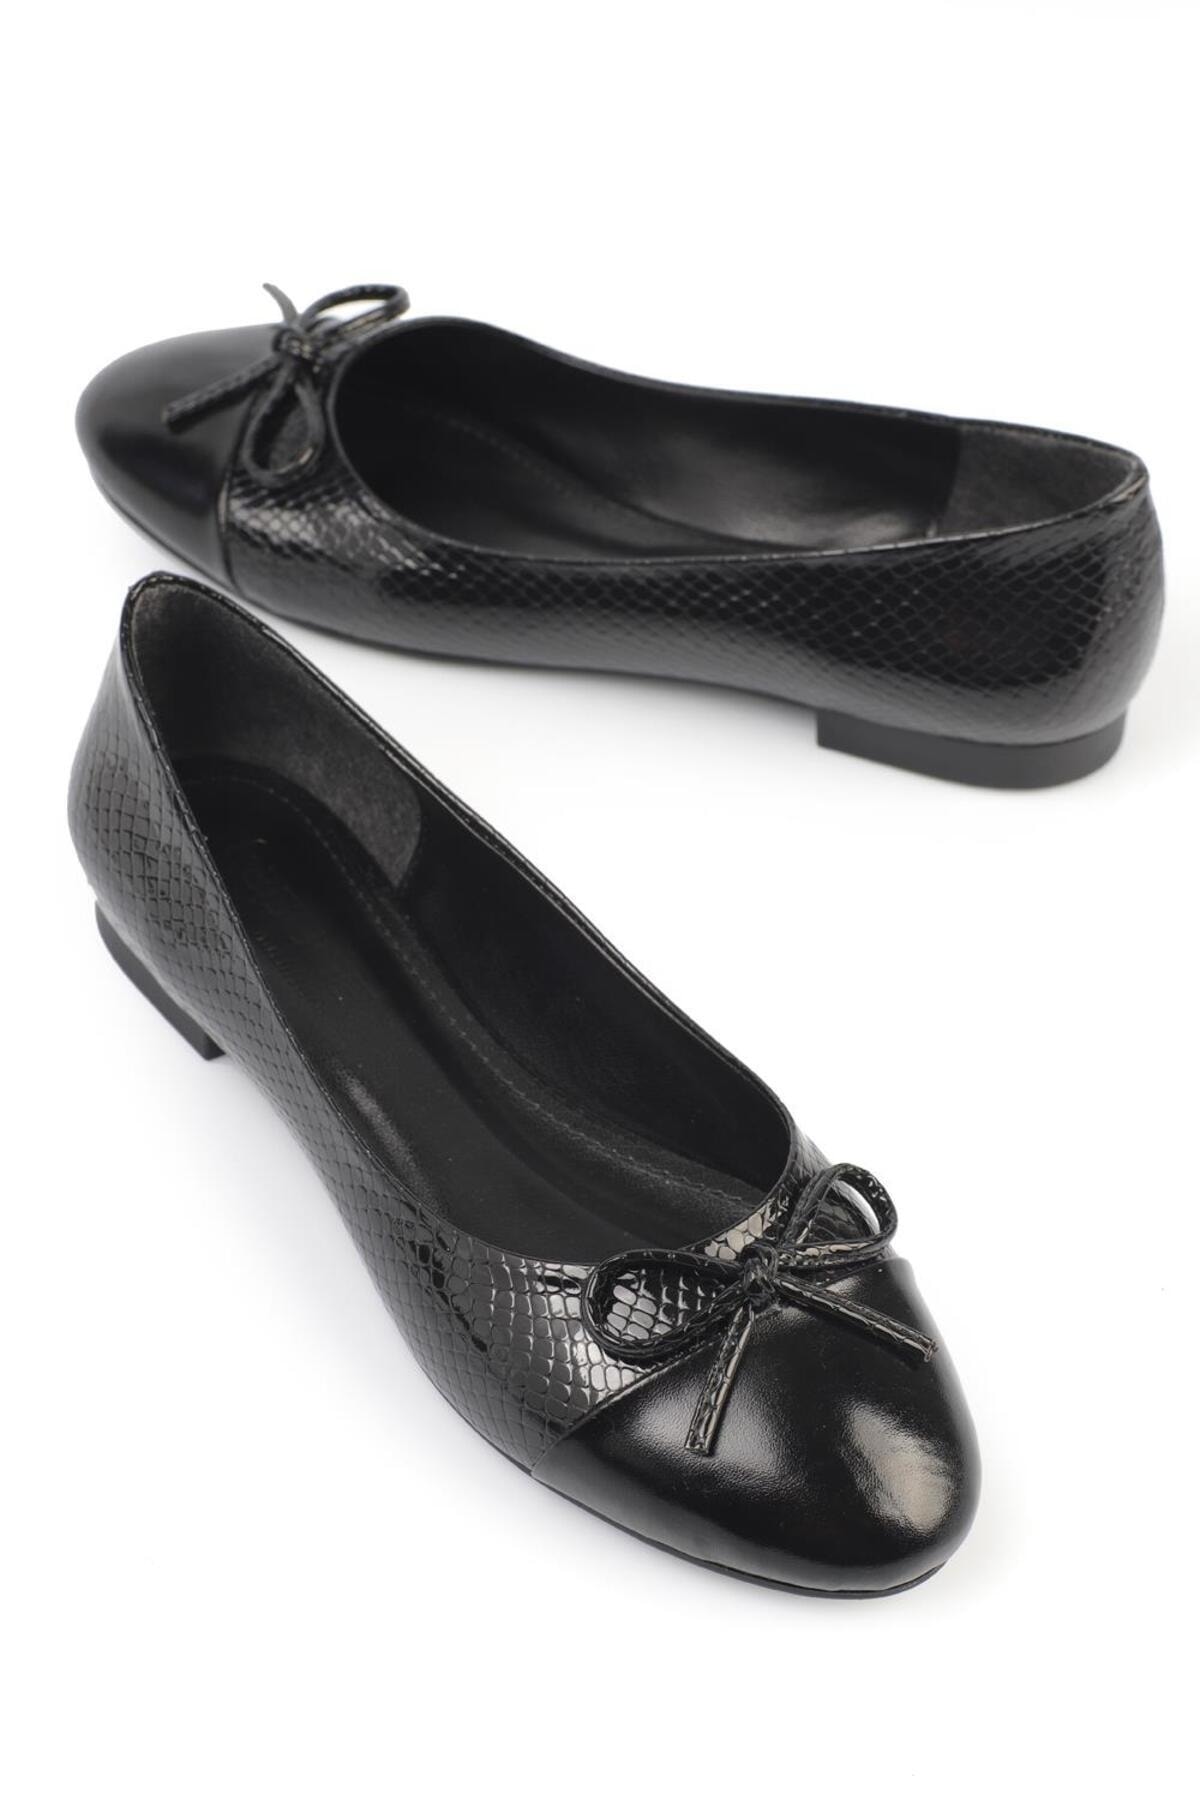 Capone Outfitters Round Toe Two-Piece Women's Ballerinas